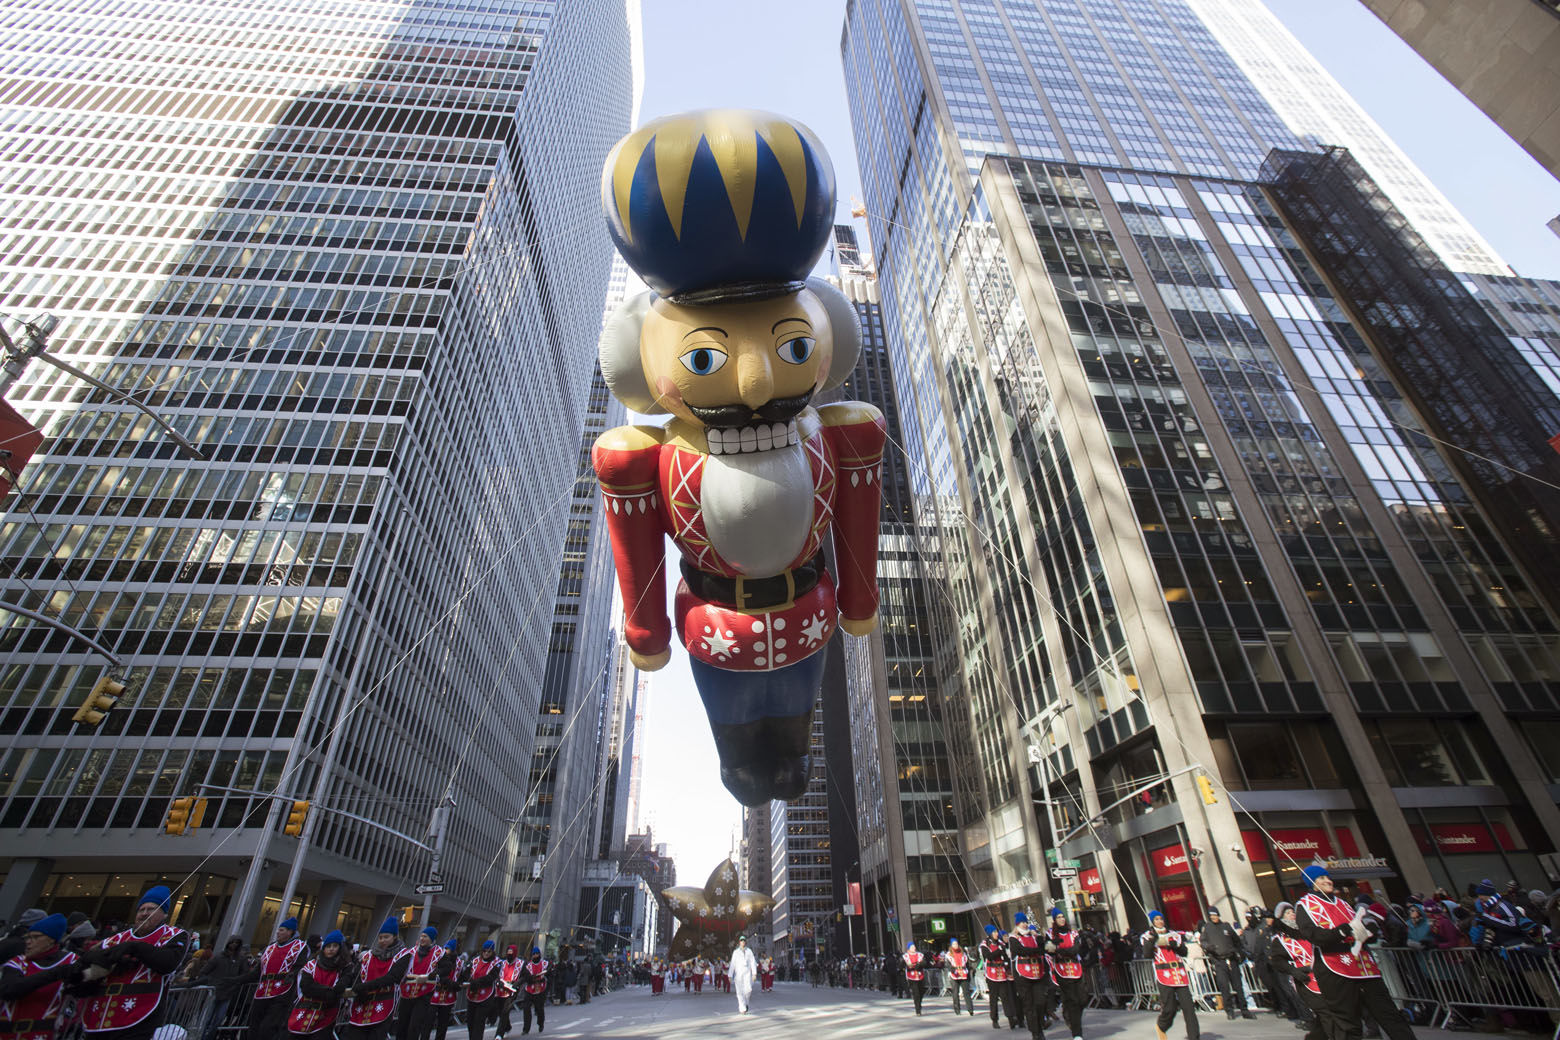 A nutcracker soldier balloon floats down 6th Avenue during the 92nd annual Macy's Thanksgiving Day Parade, Thursday, Nov. 22, 2018, in New York. (AP Photo/Mary Altaffer)